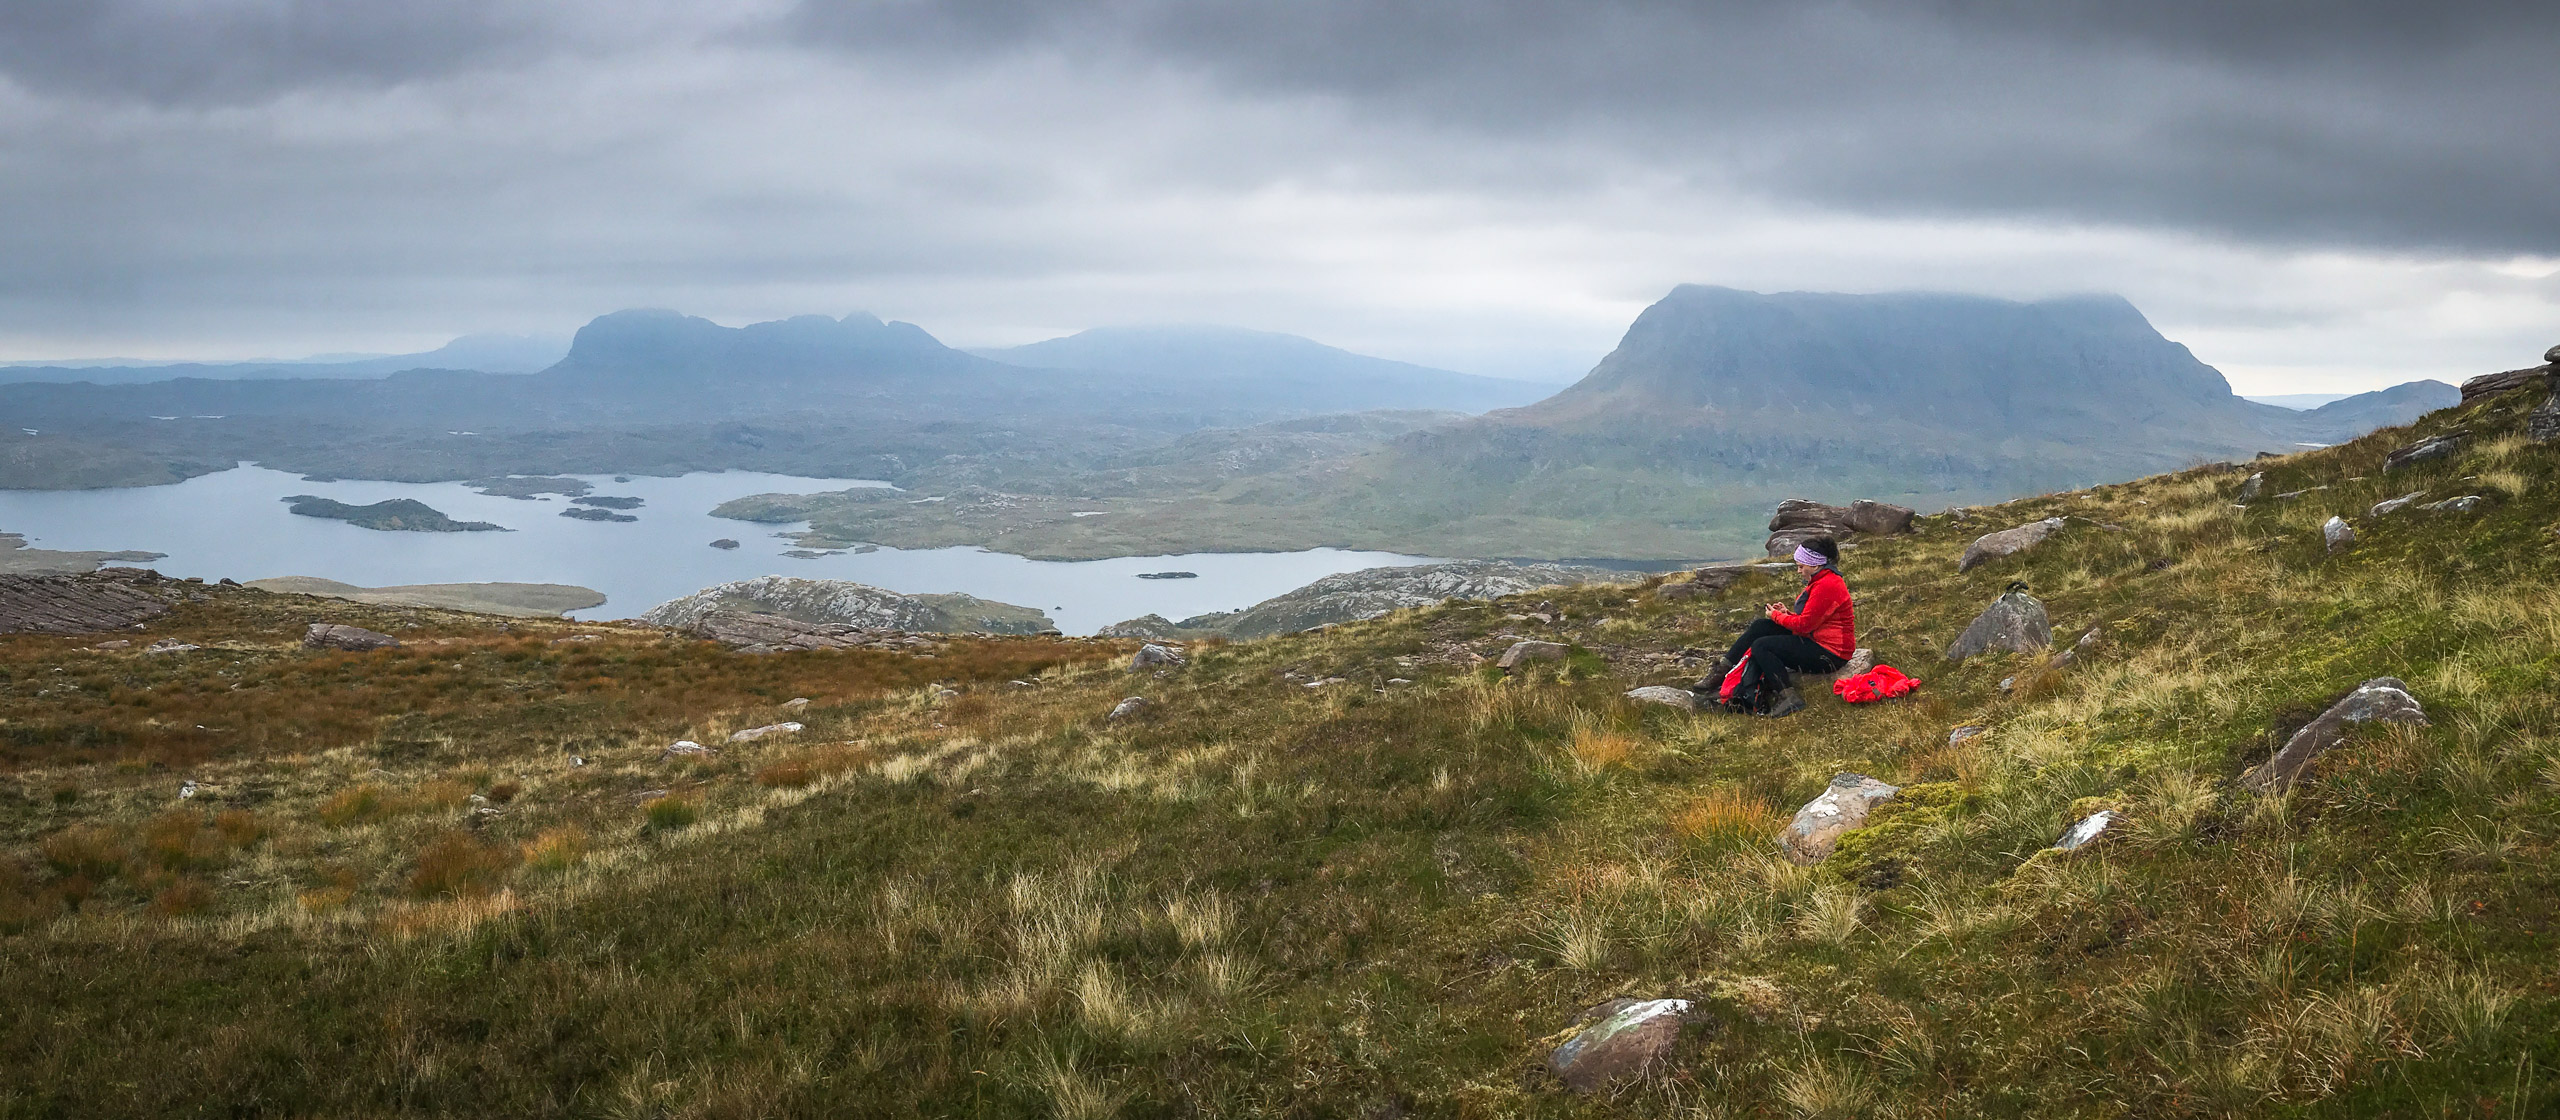 Pause on the hike at Stac Pollaidh